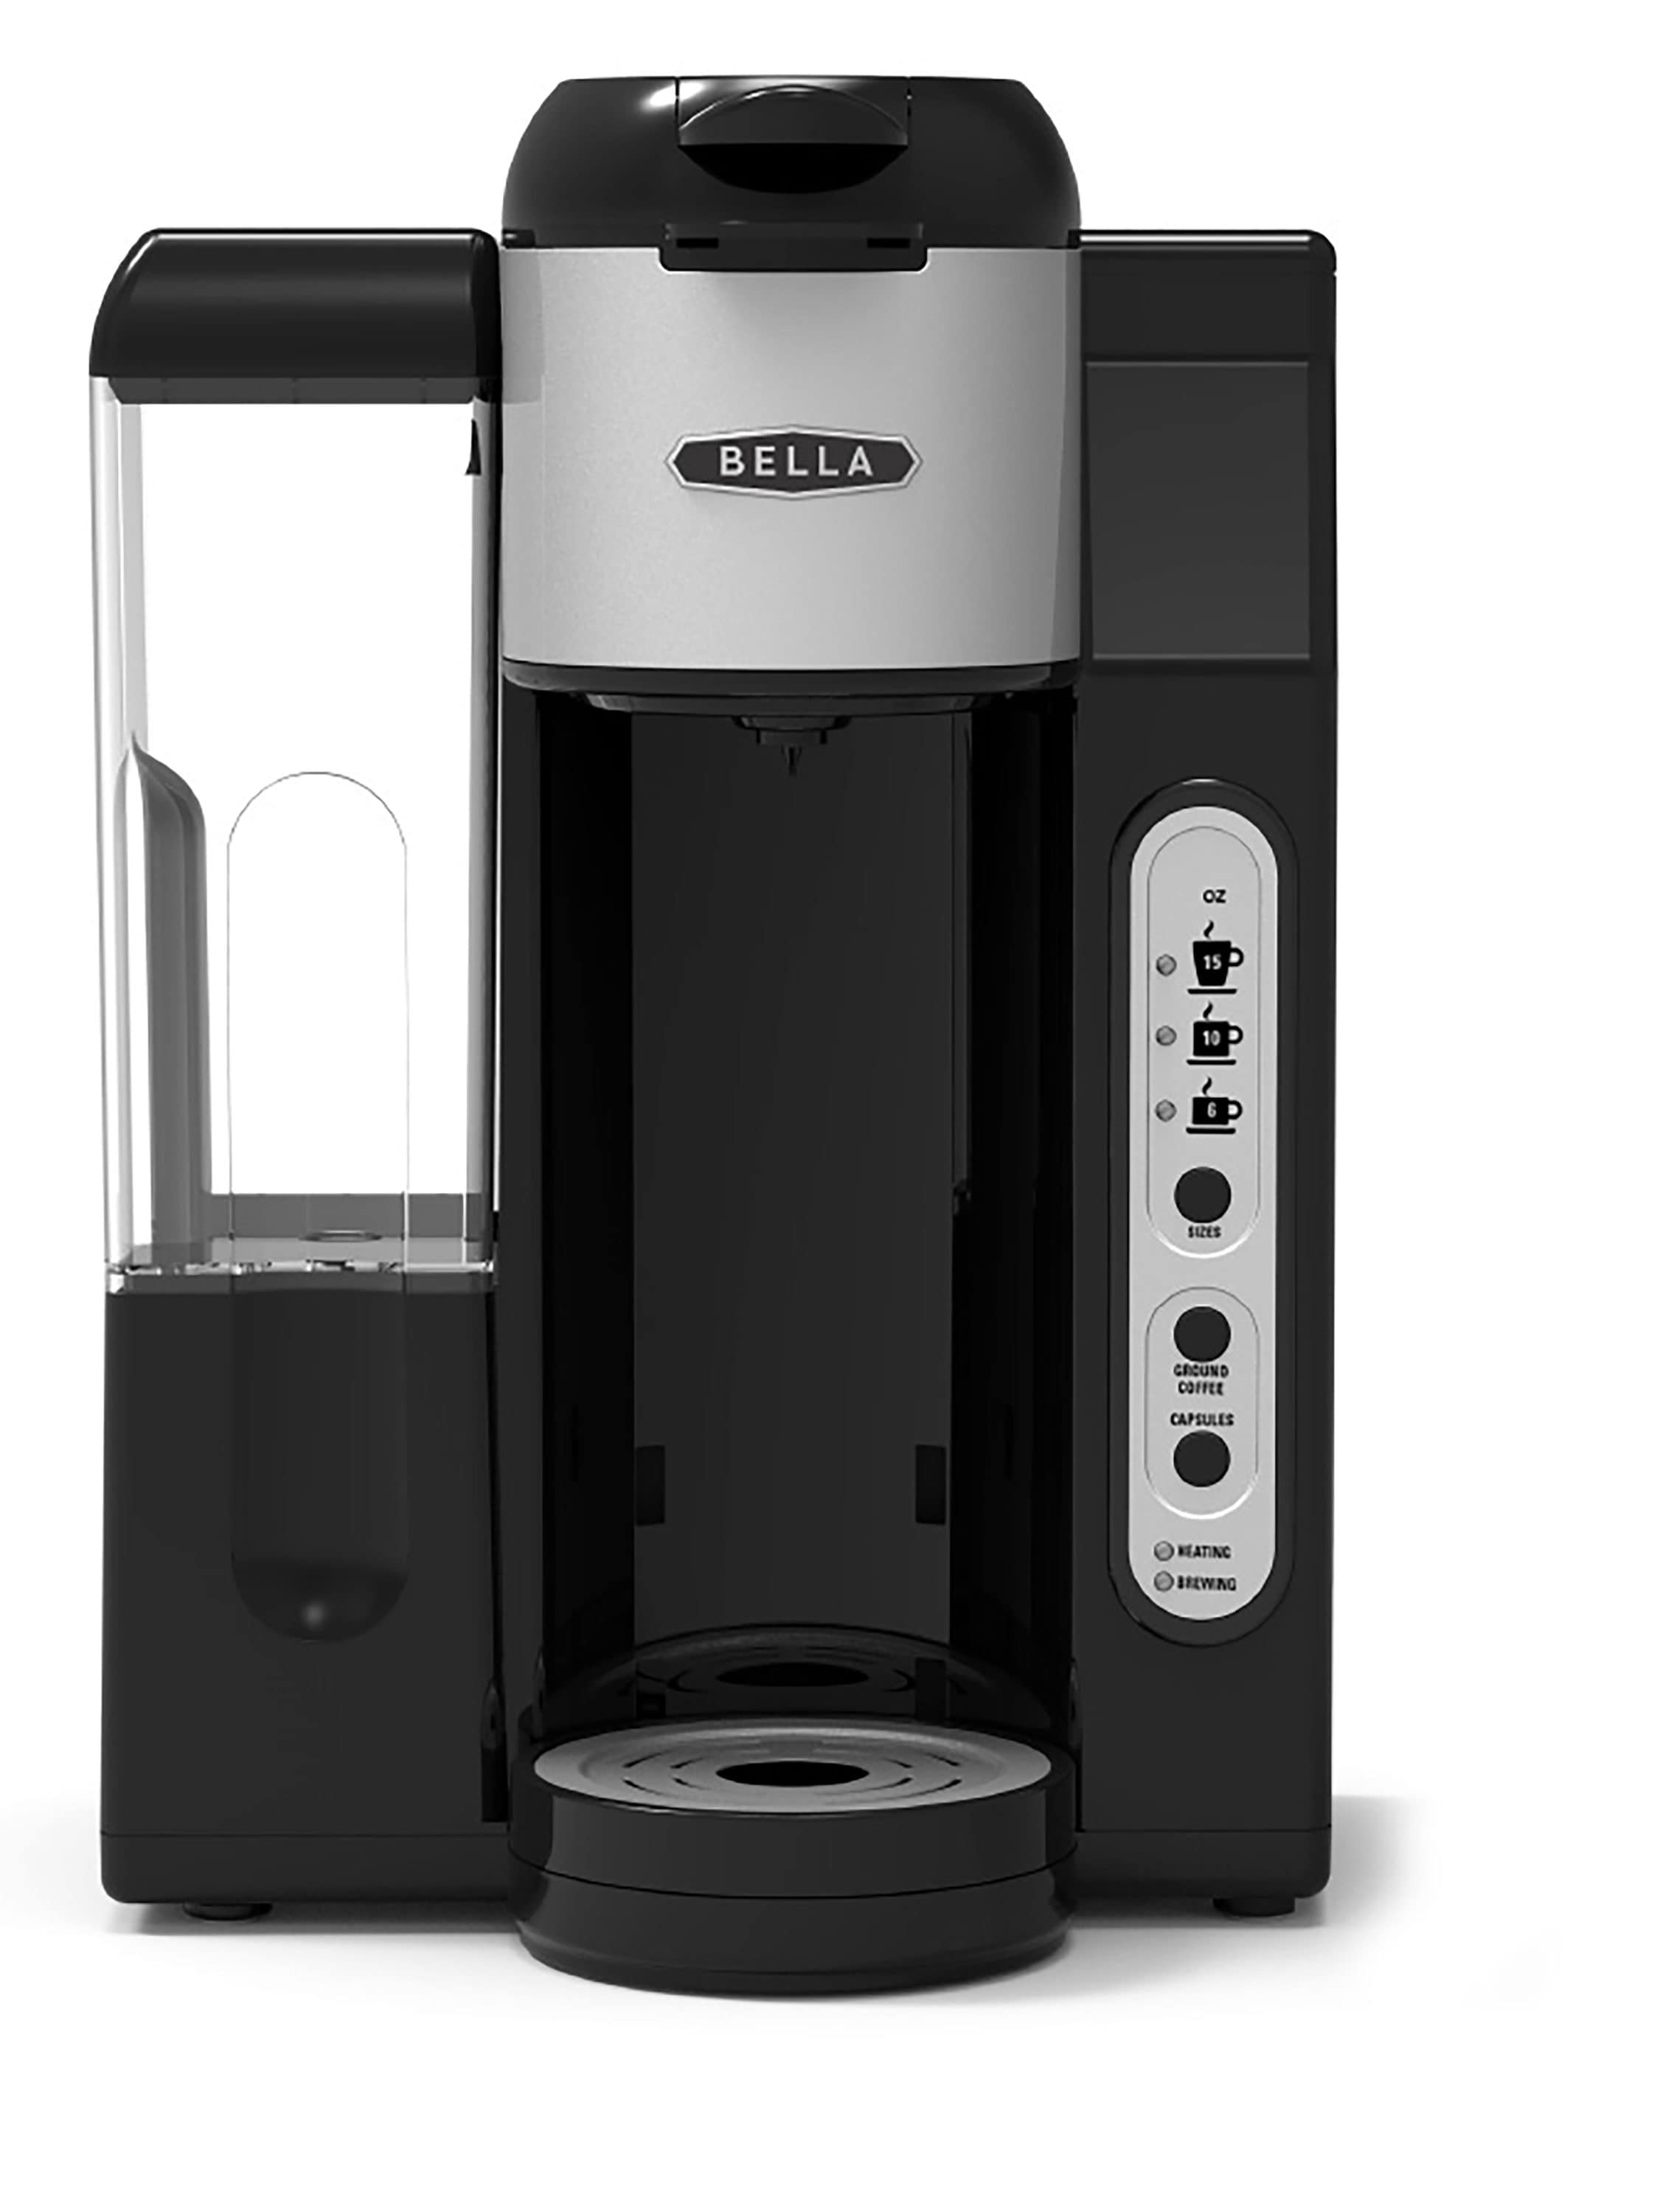 Wake Up in Style! 3 Fabulous Coffee & Tea Appliances from BELLA